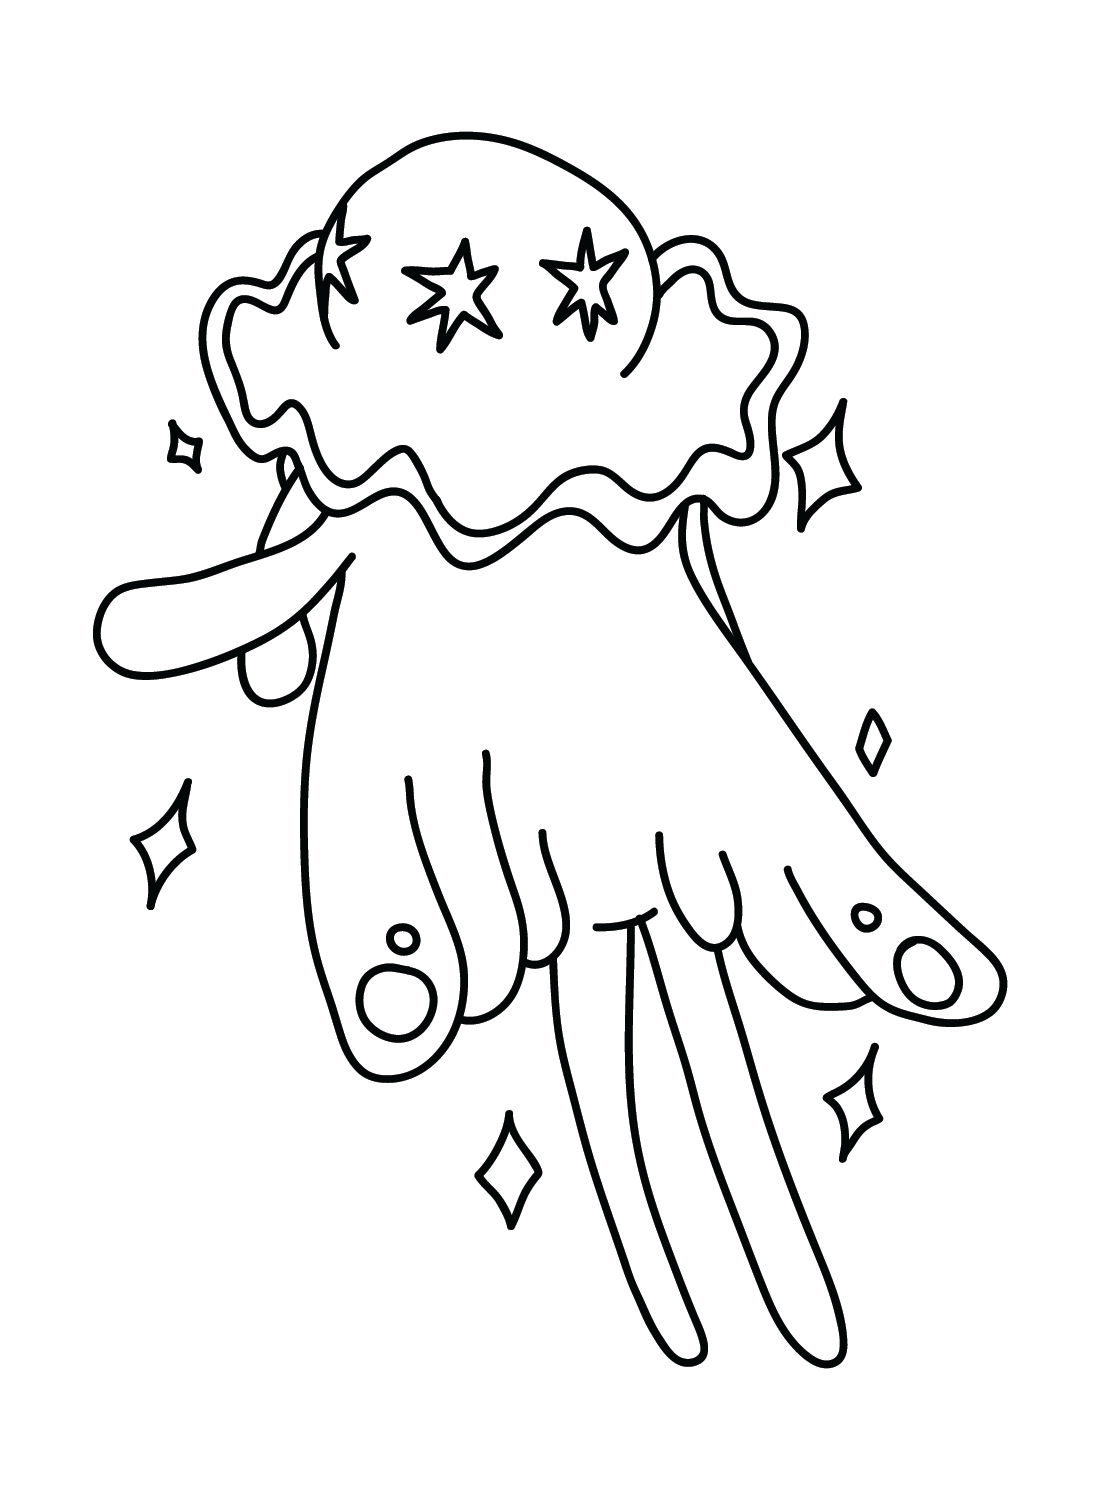 Nihilego Images Coloring Page